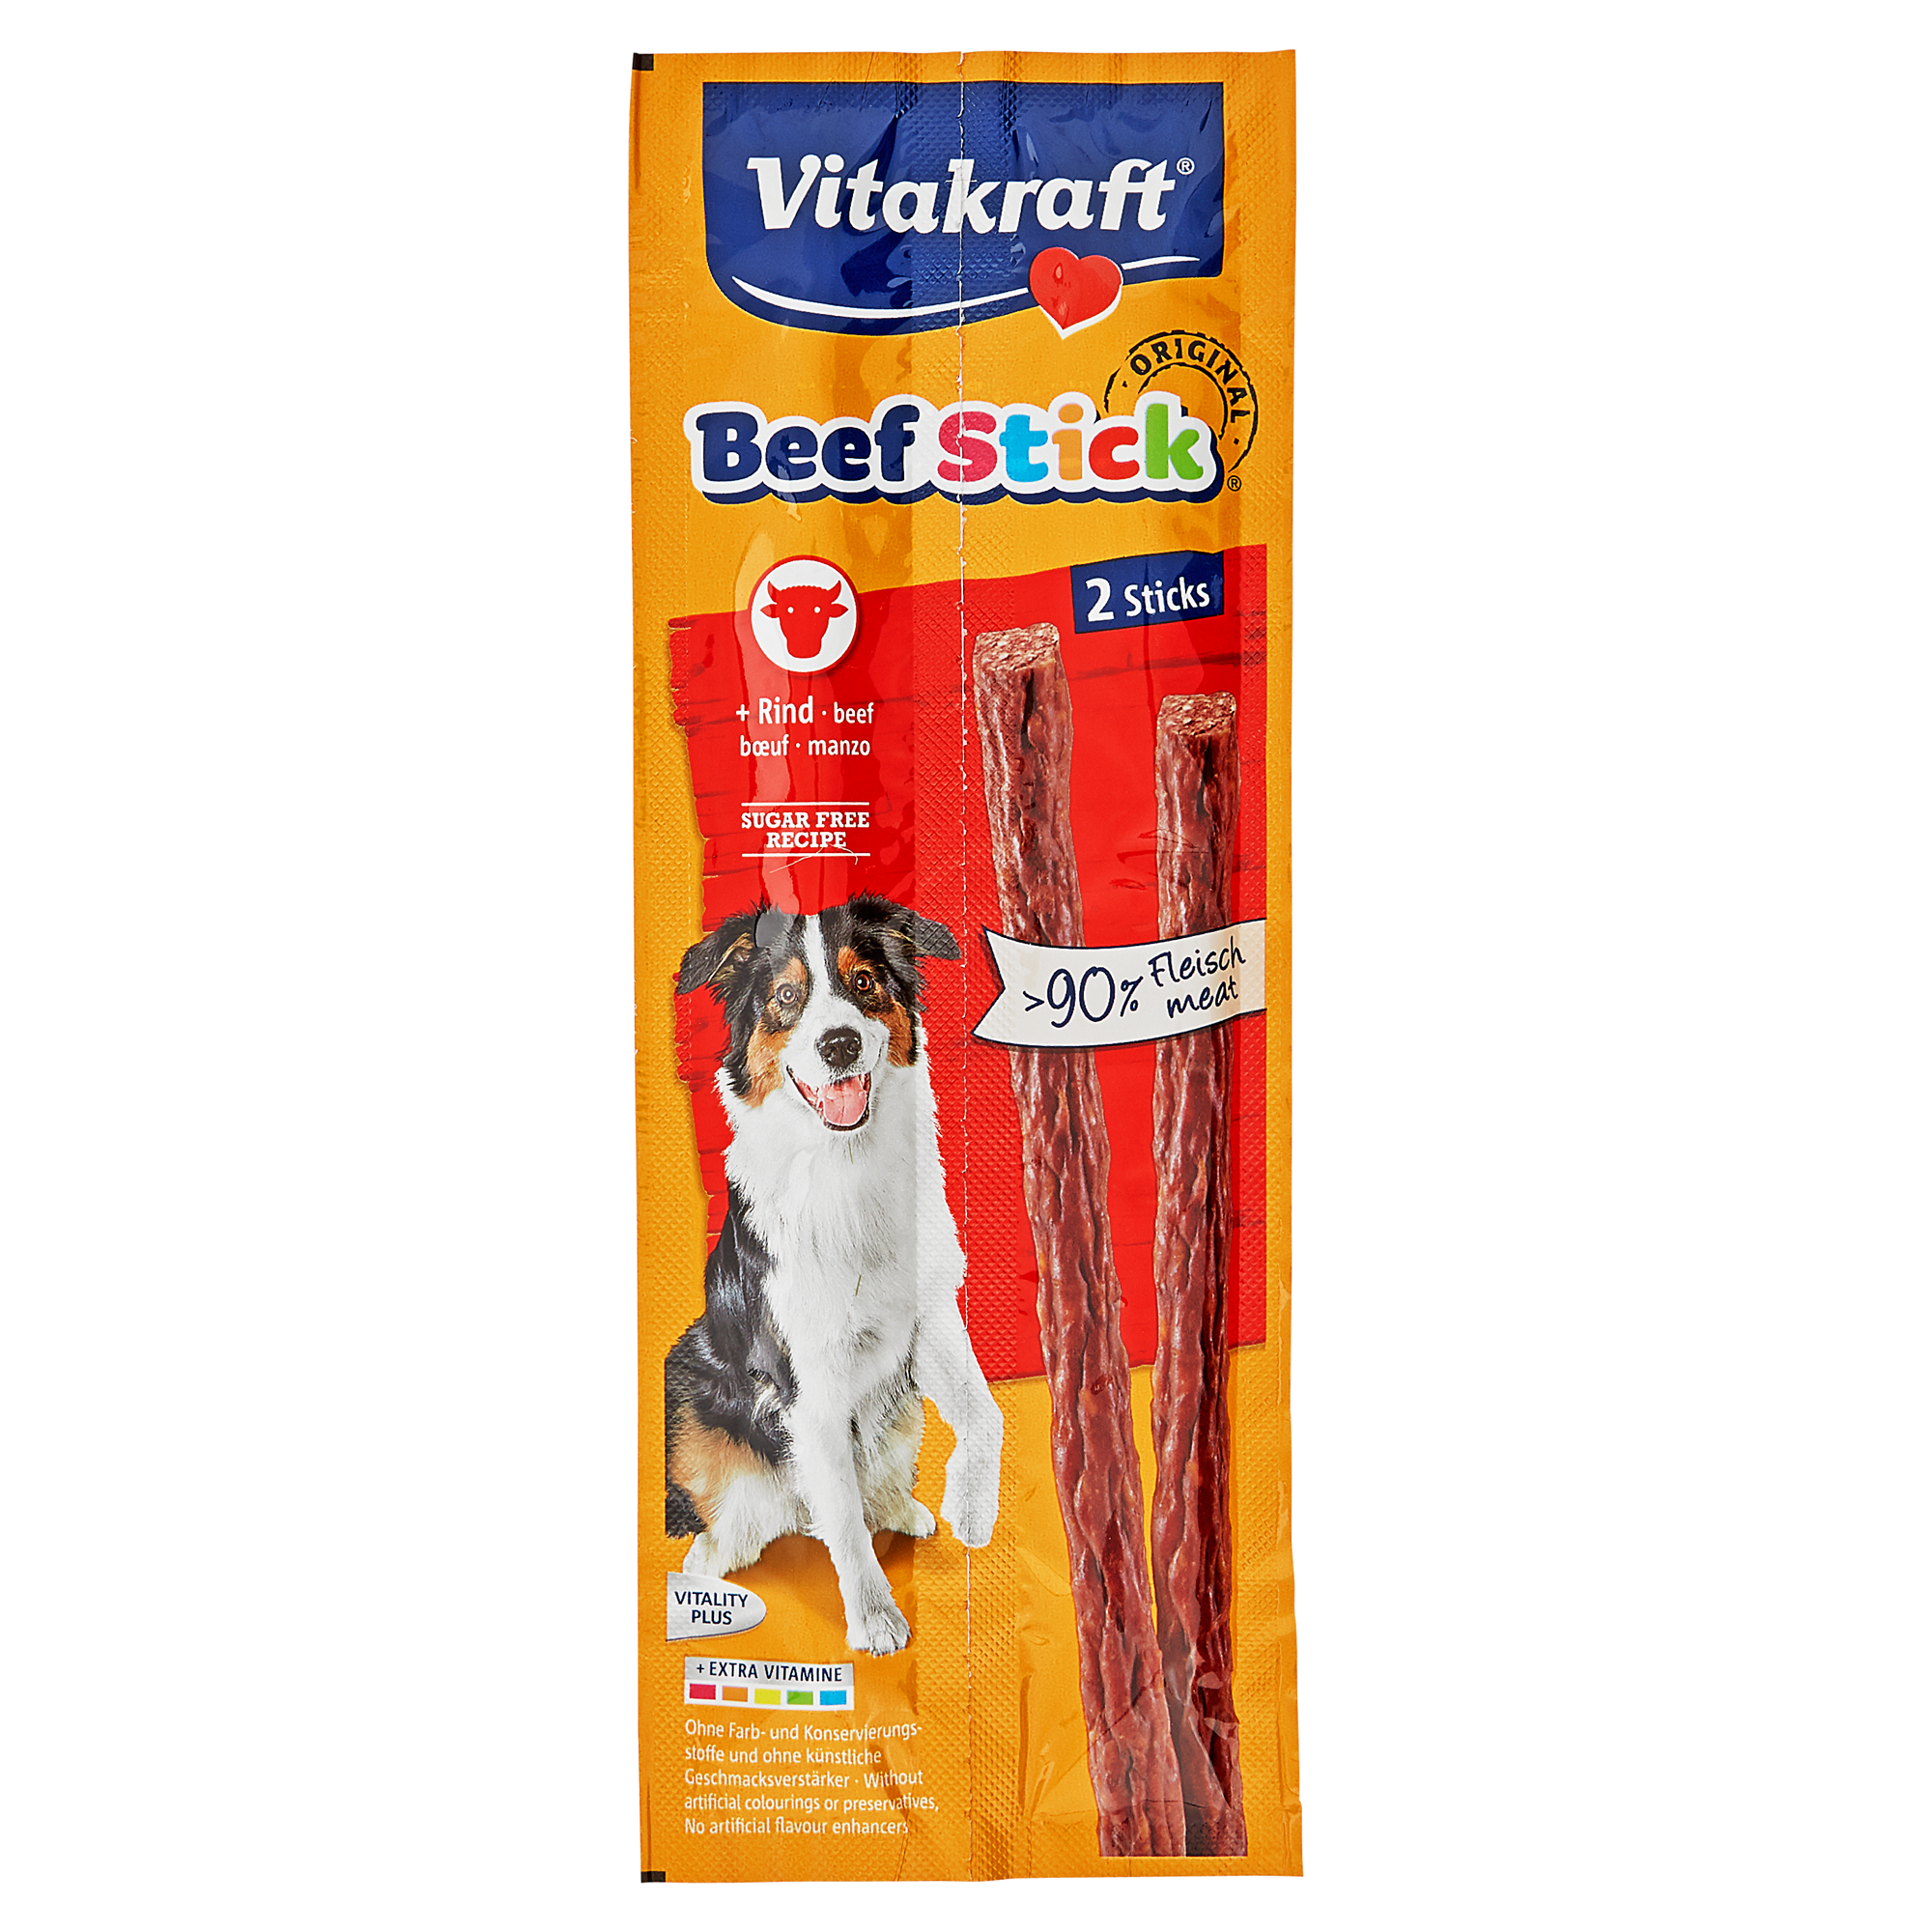 Hundesnack "Beef Stick" mit Rind 2 Stück + product picture